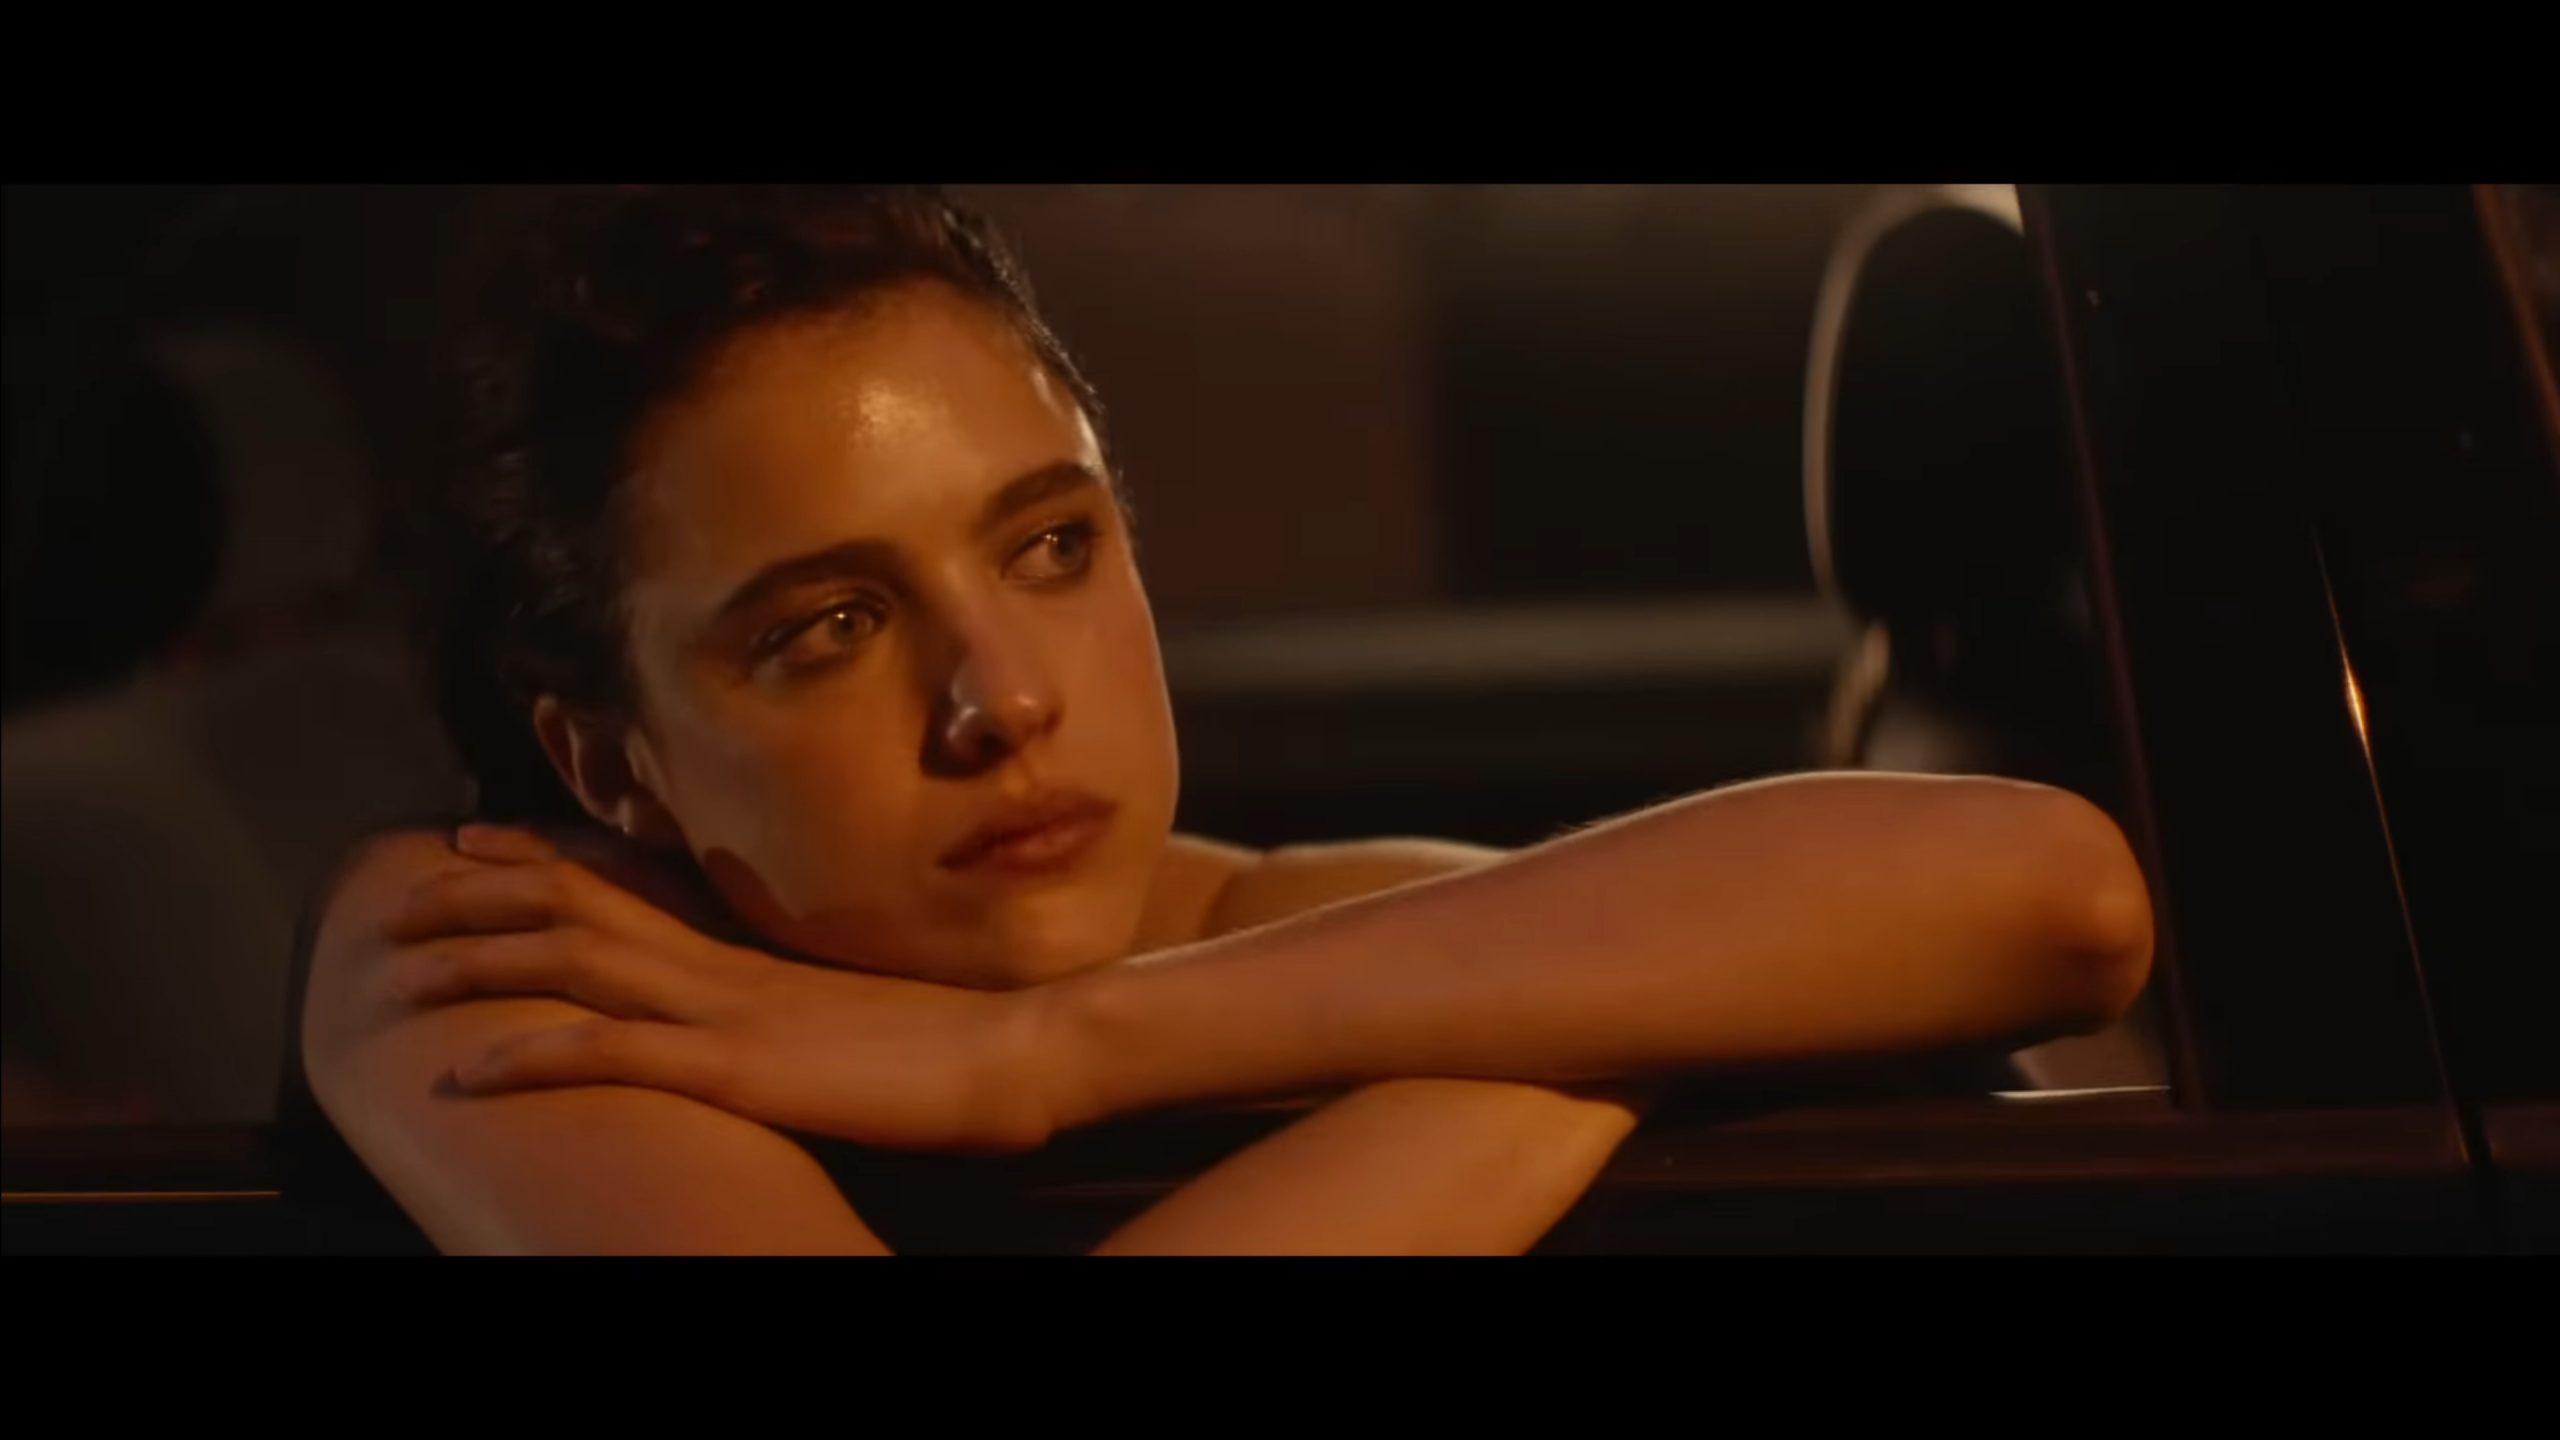 Trish (Margaret Qualley) in a cab, looking off into the distance